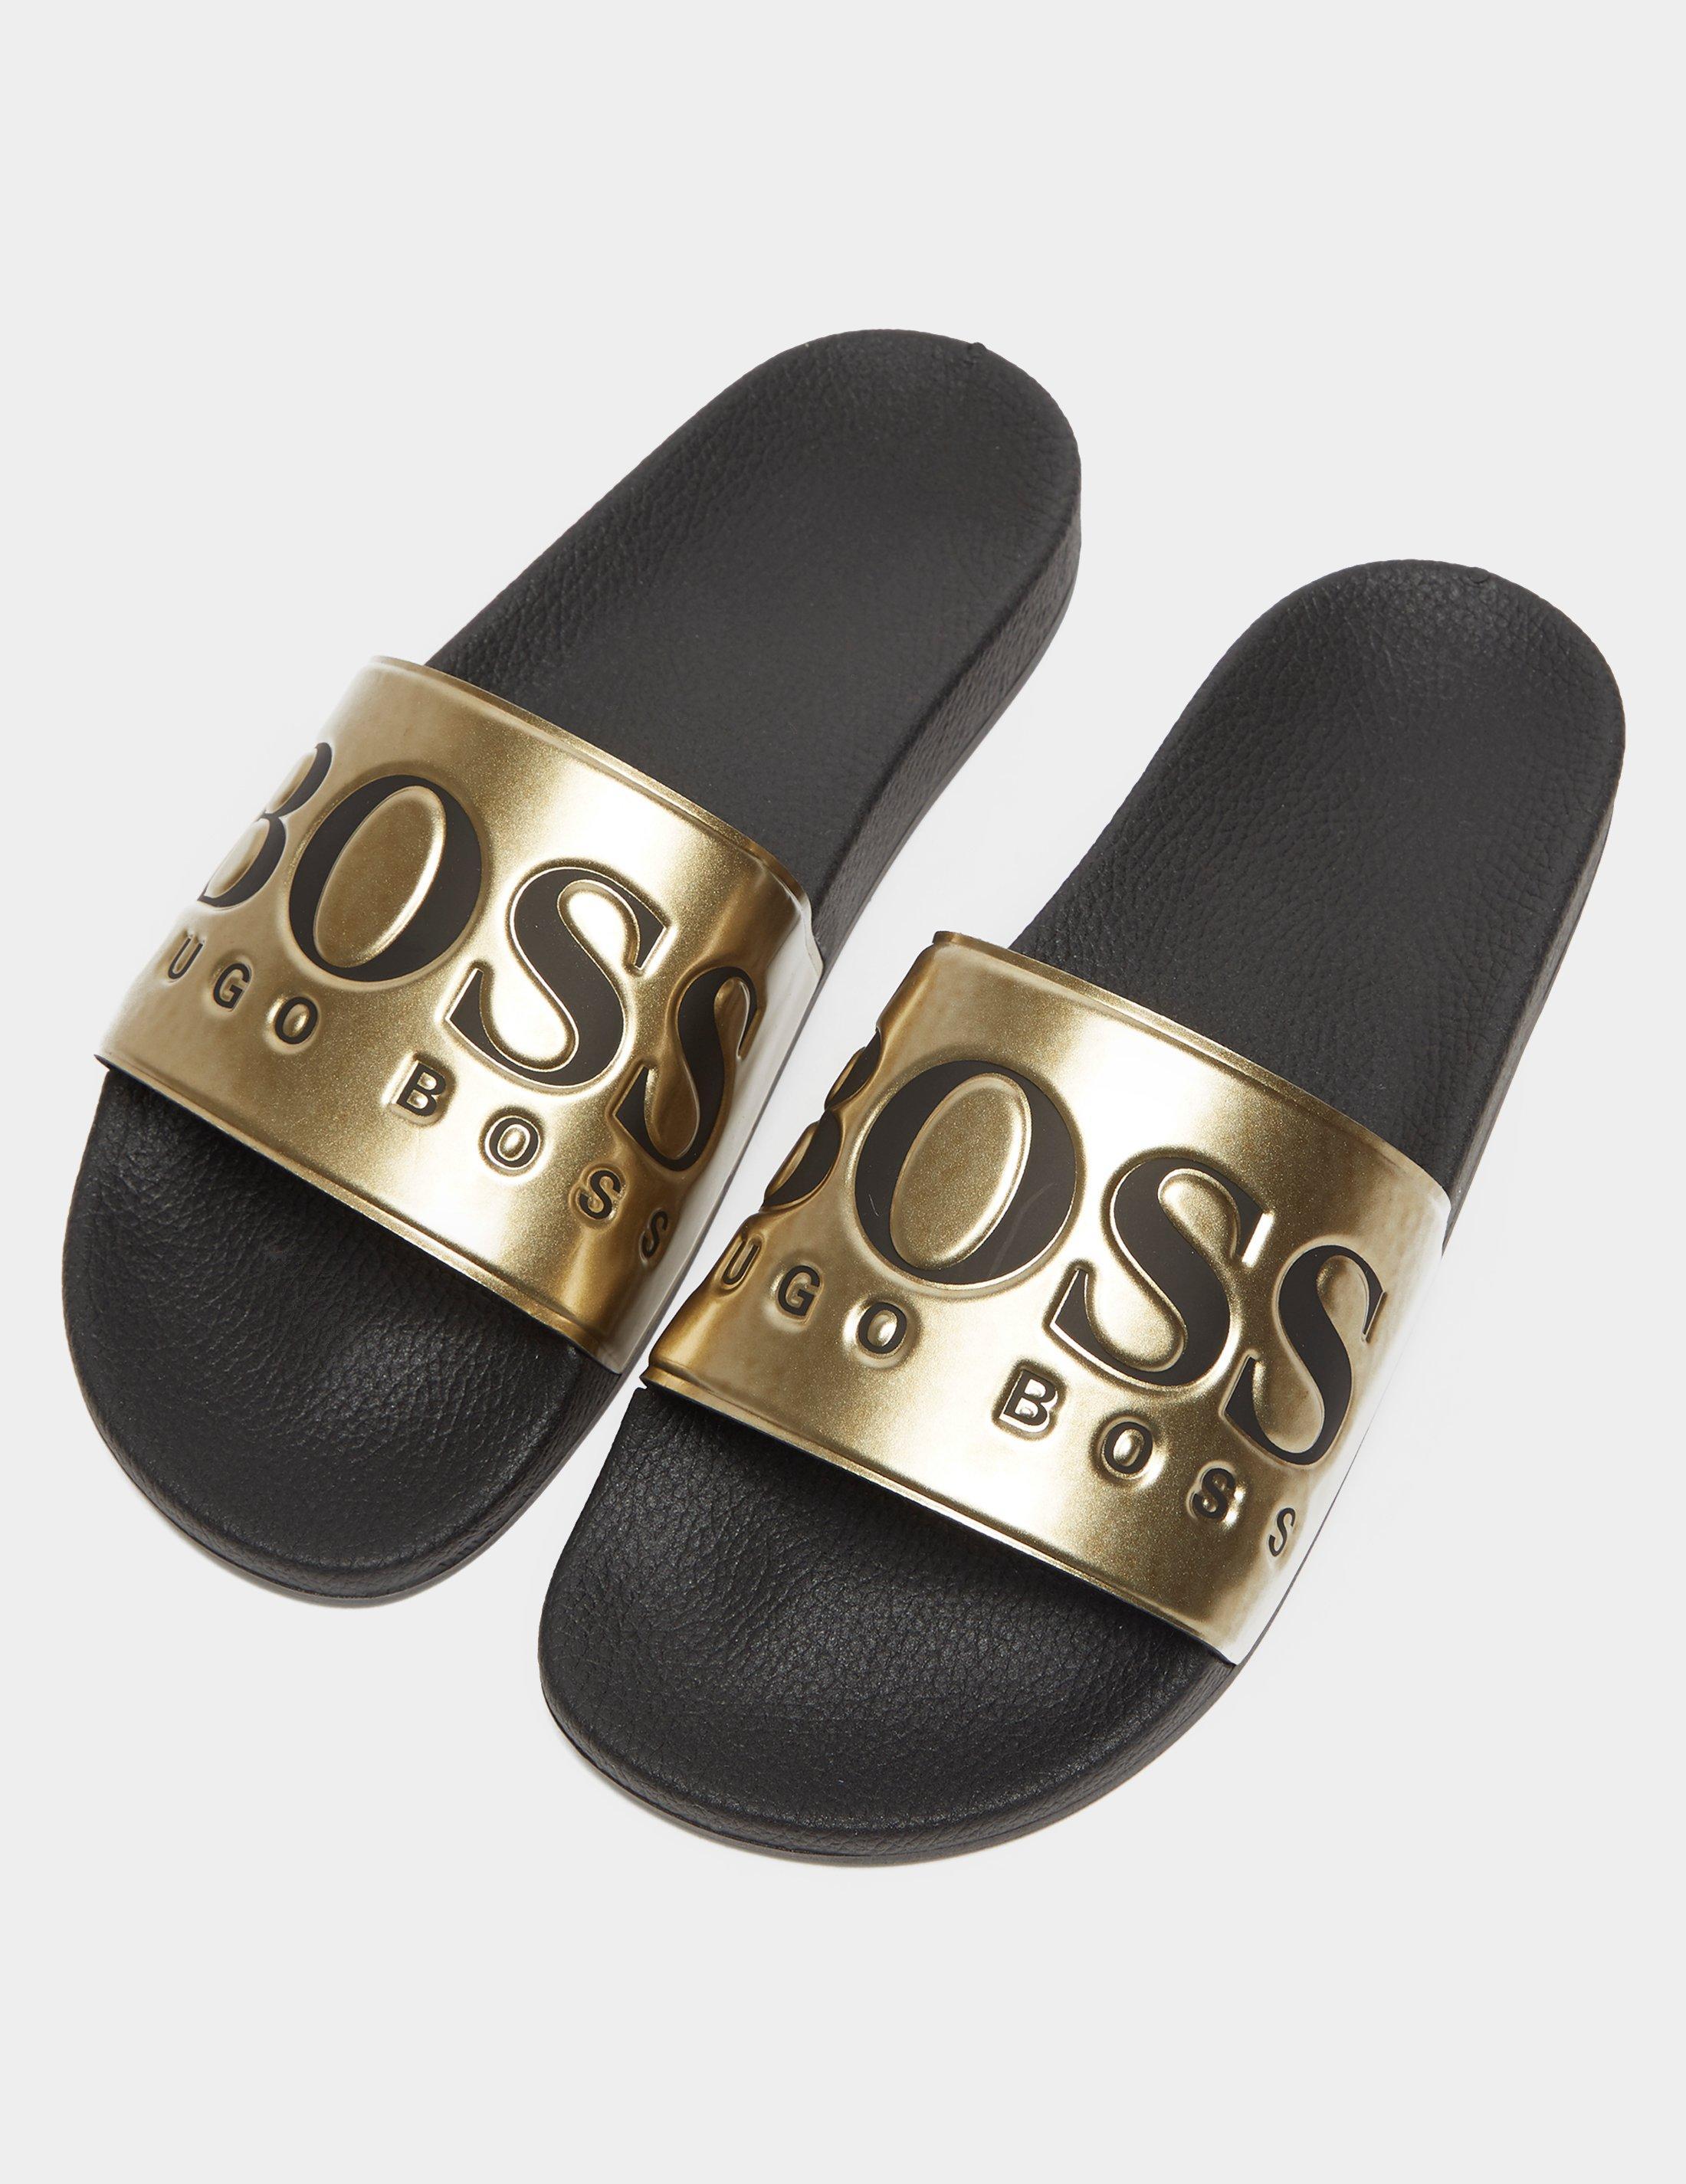 black and gold boss sliders